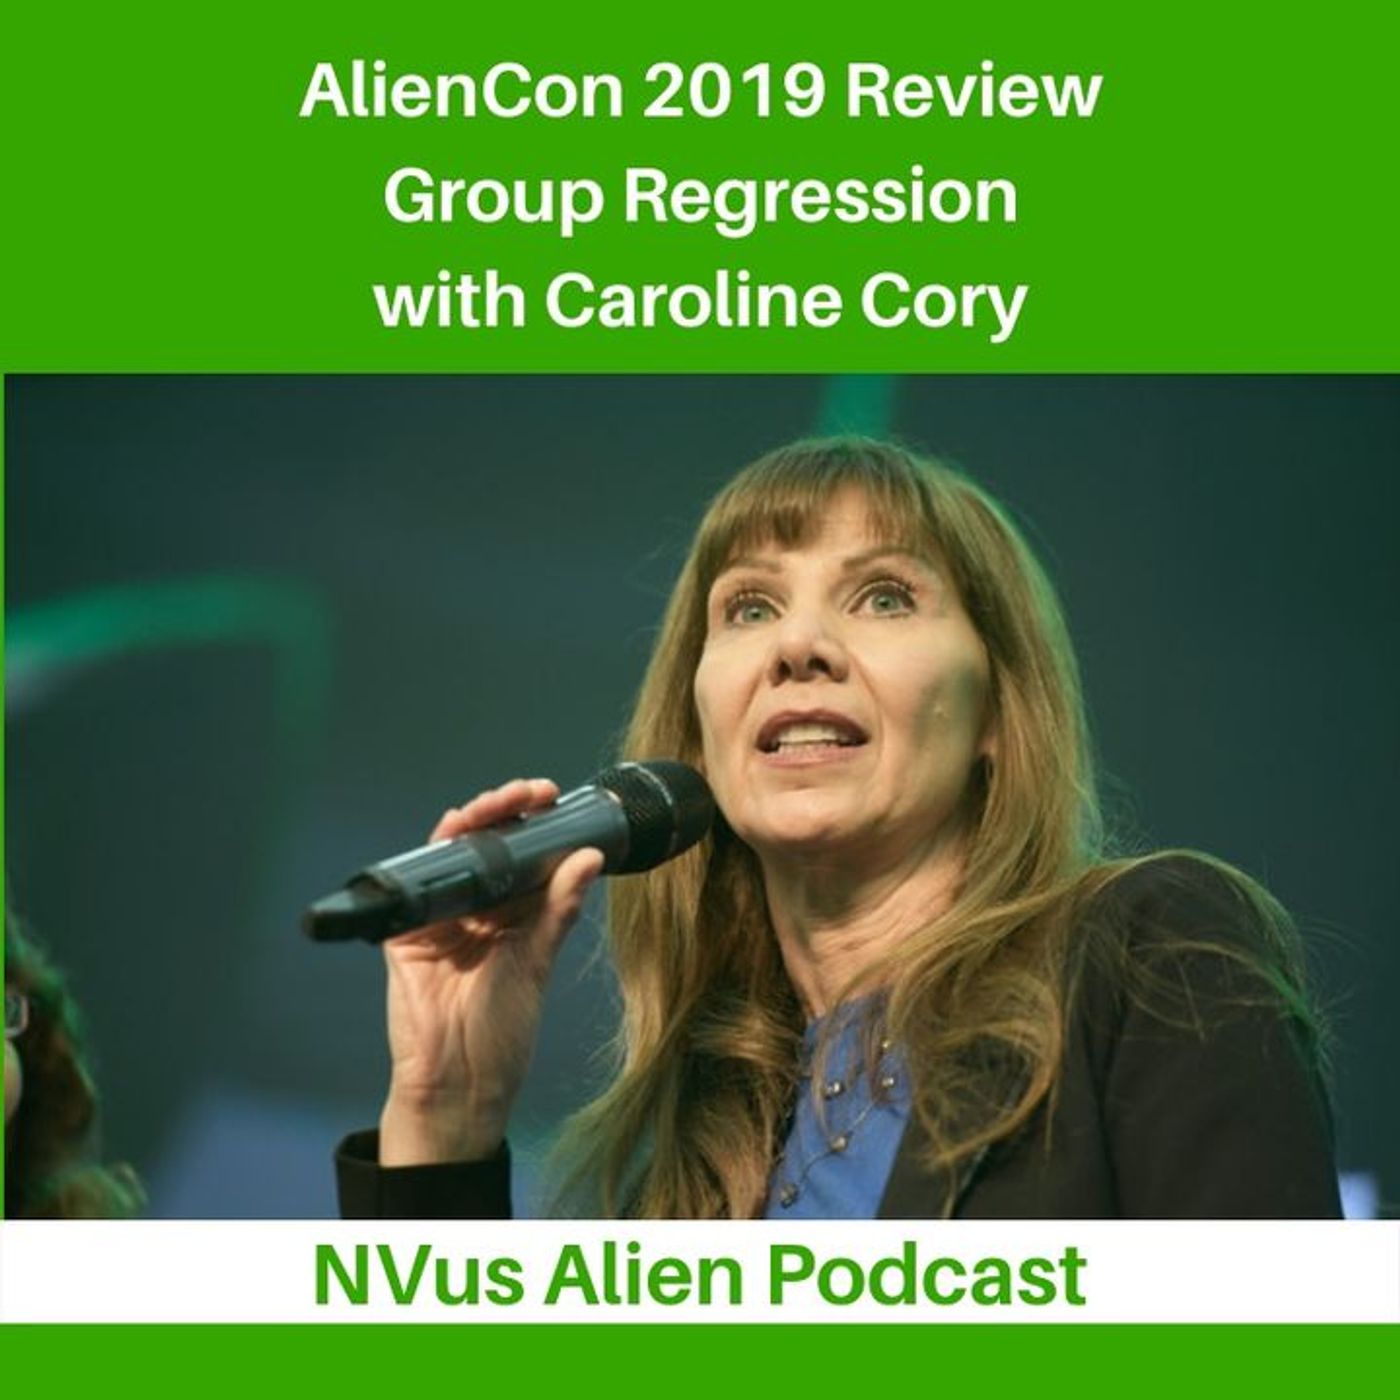 REPOST: AlienCon Review 👽 Group Regression with Caroline Cory